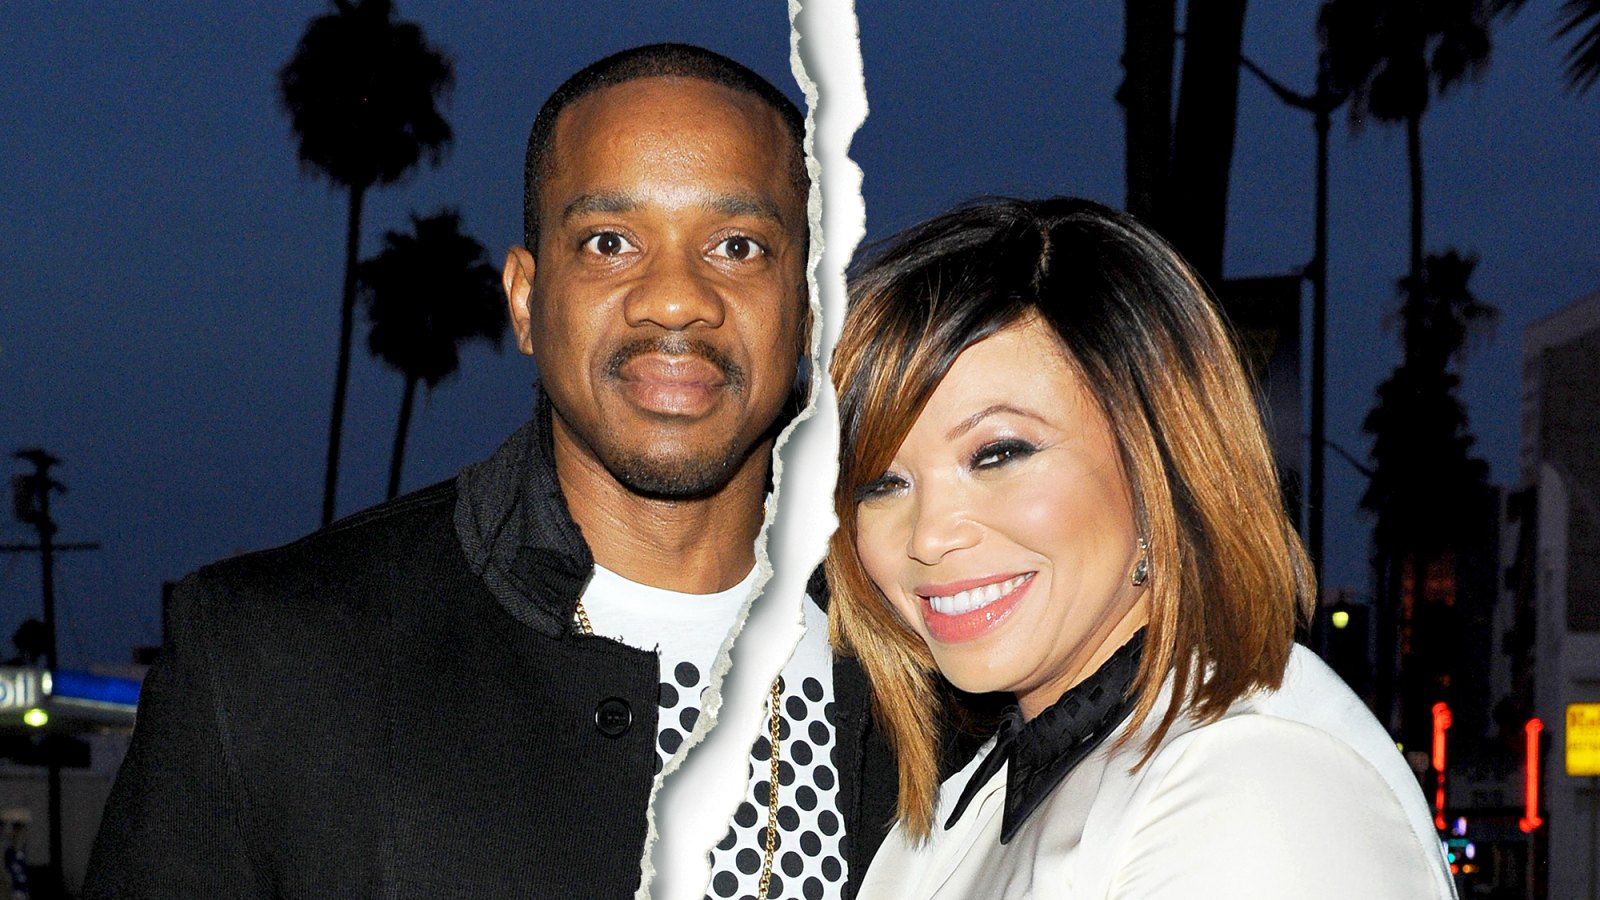 Duane Martin and Tisha Campbell attend Vivica A. Fox's 50th birthday celebration at Philippe Chow in Beverly Hills, California.